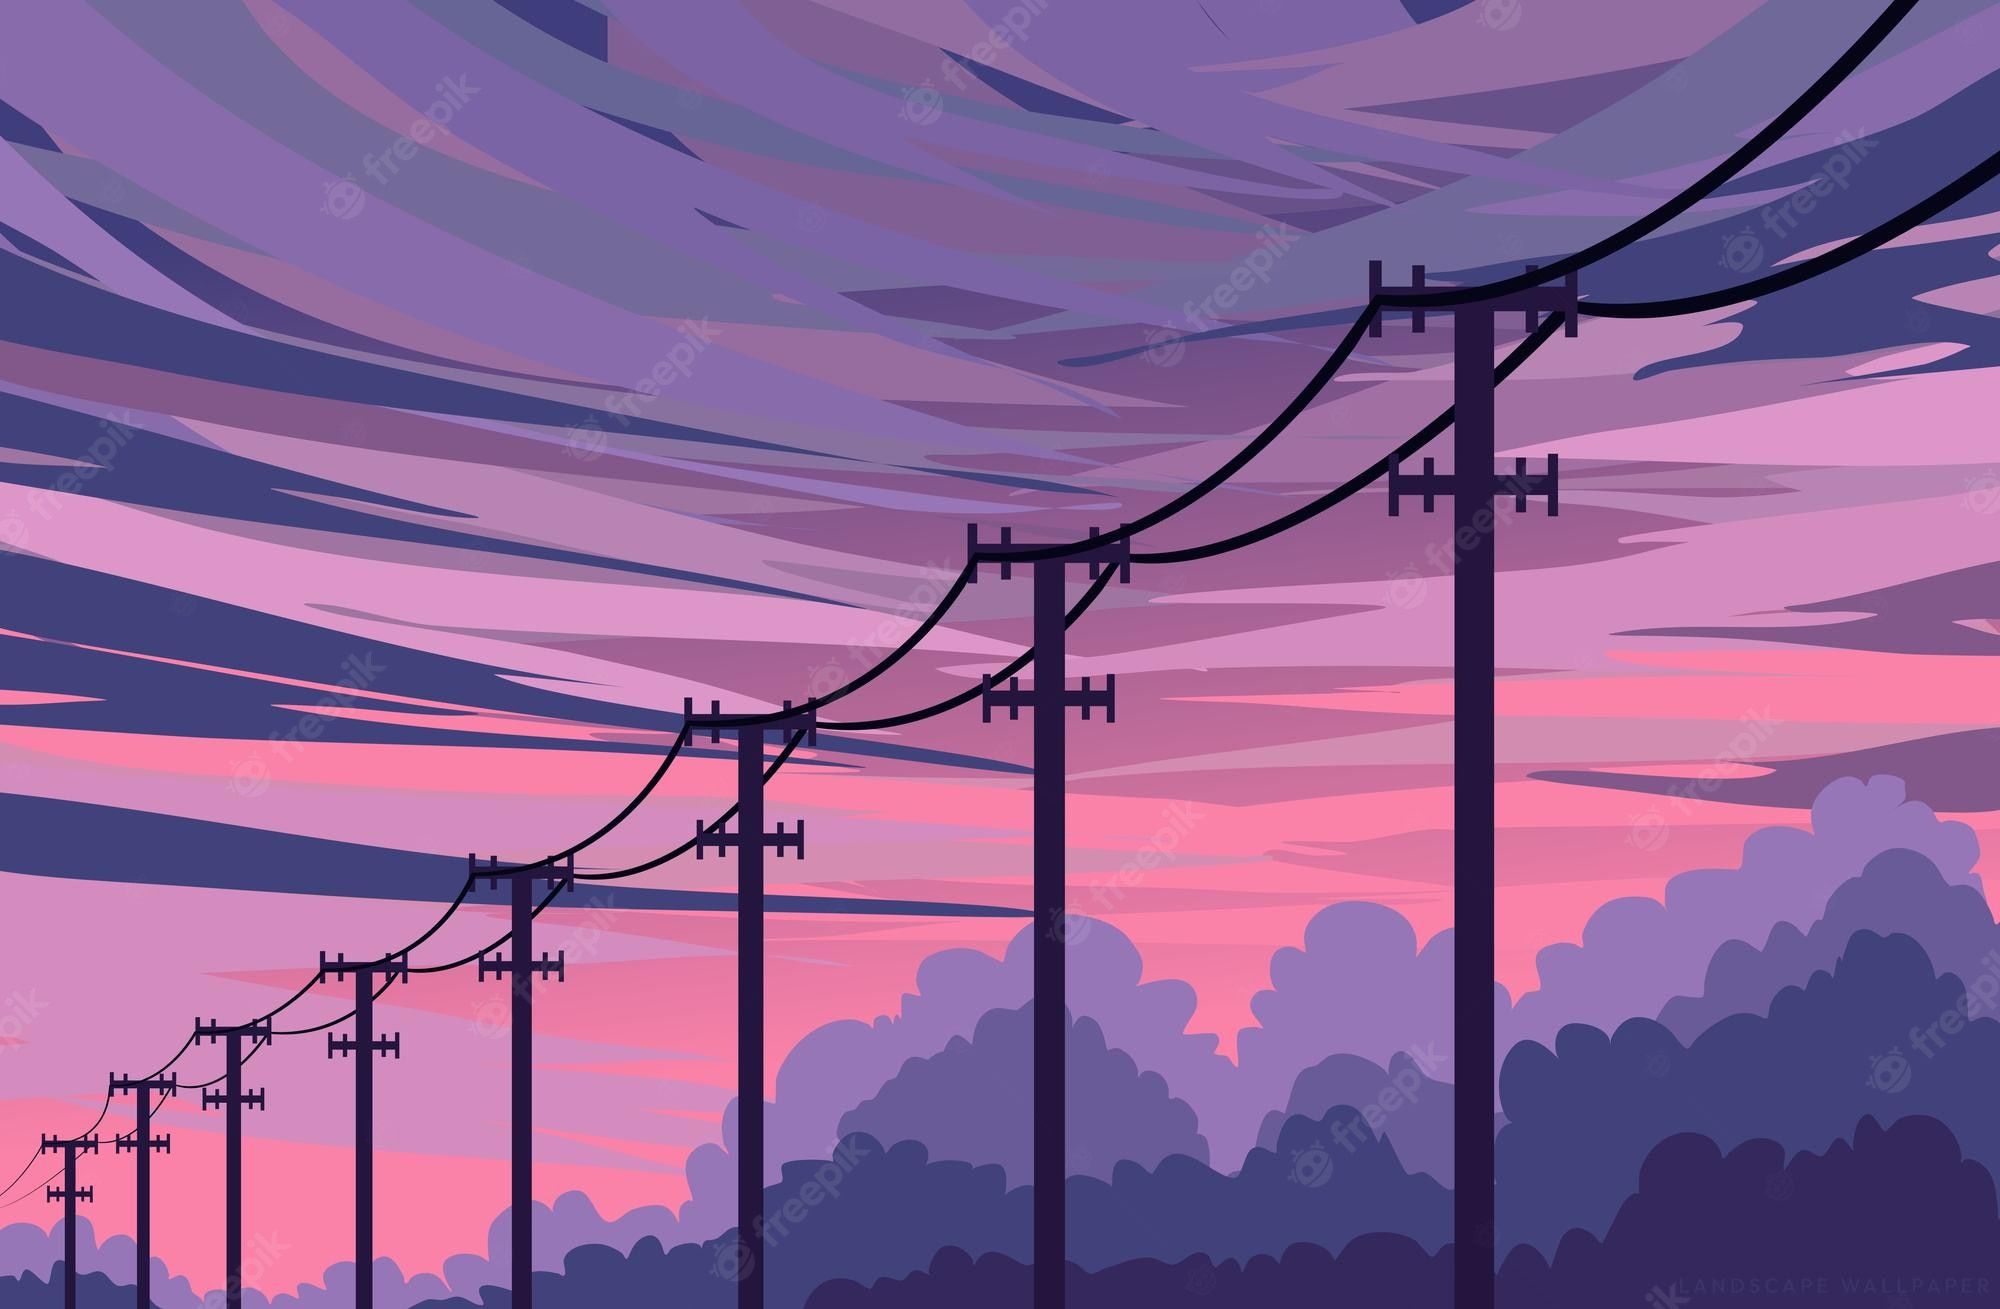 An illustration of power lines in front of a pink and purple sky - Anime sunset